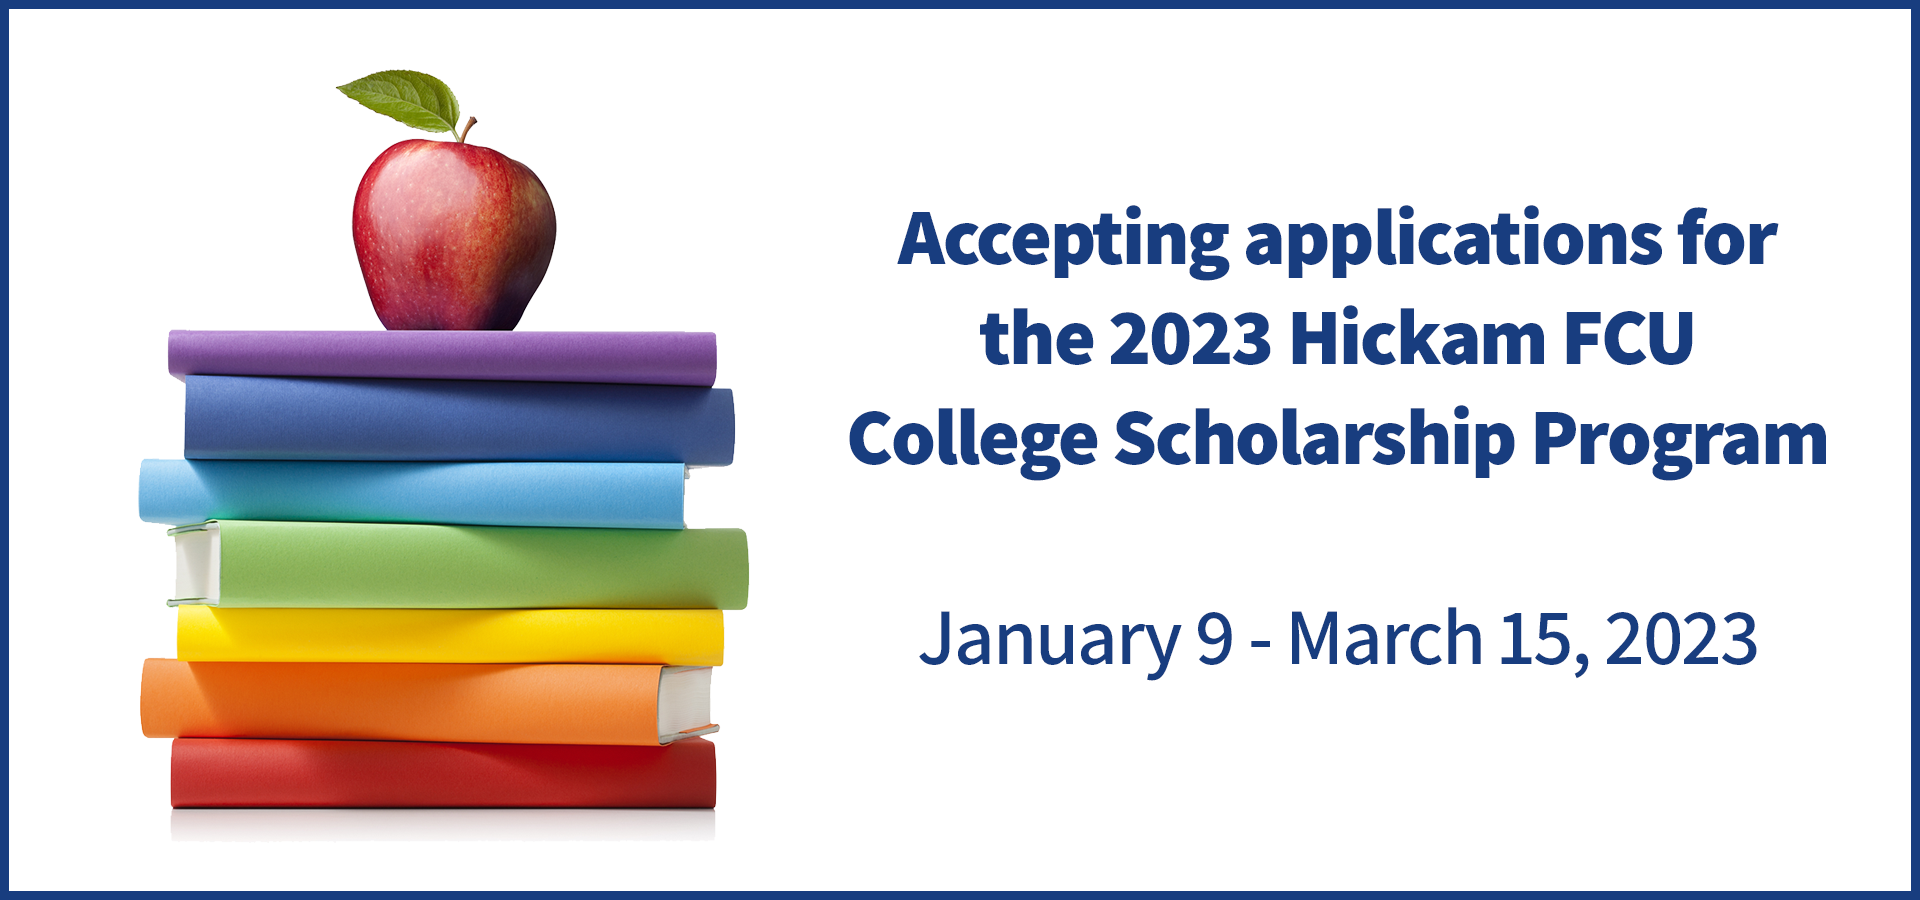 Accepting applications for the 2023 Hickam FCU College Scholarship Program January 9 - March 15, 2023